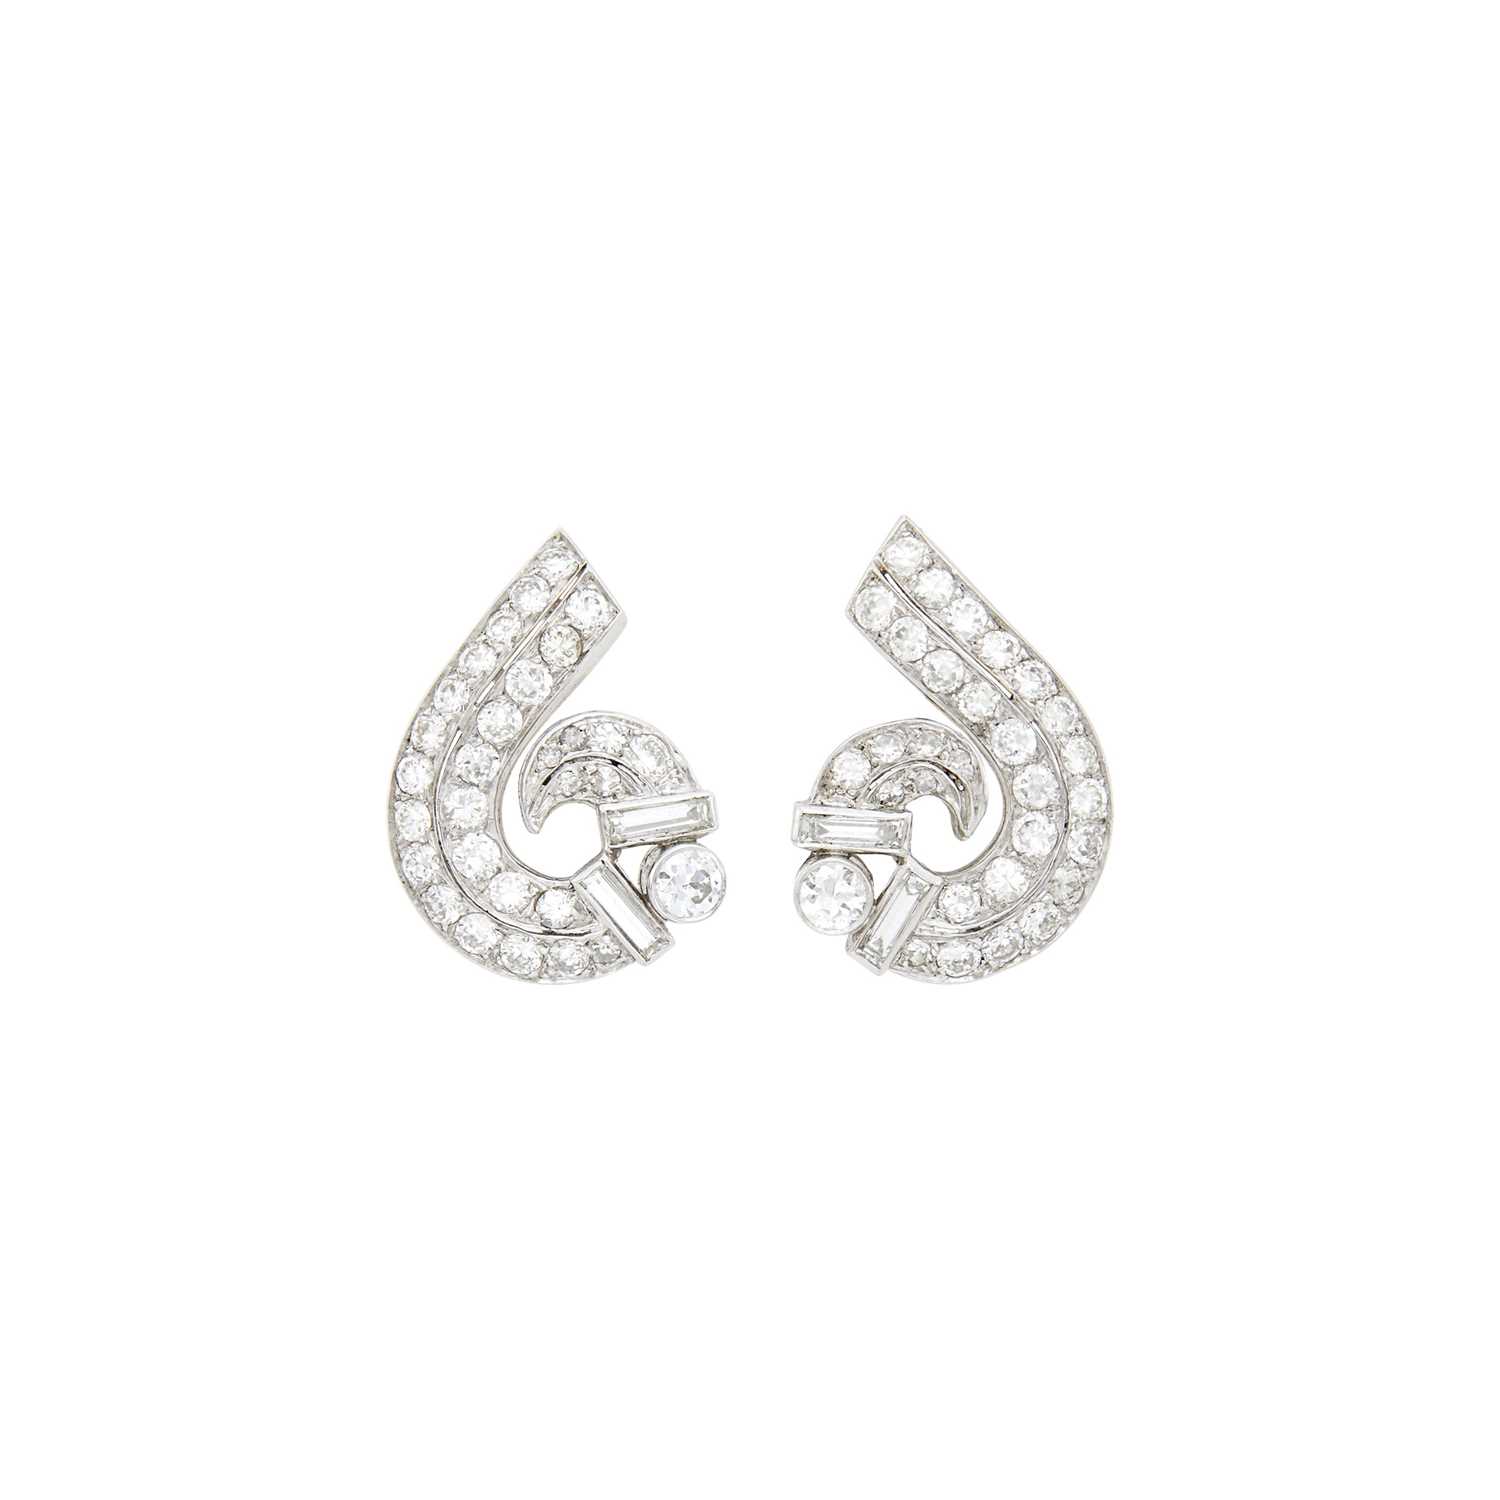 Lot 1069 - Pair of Platinum and Diamond Earclips